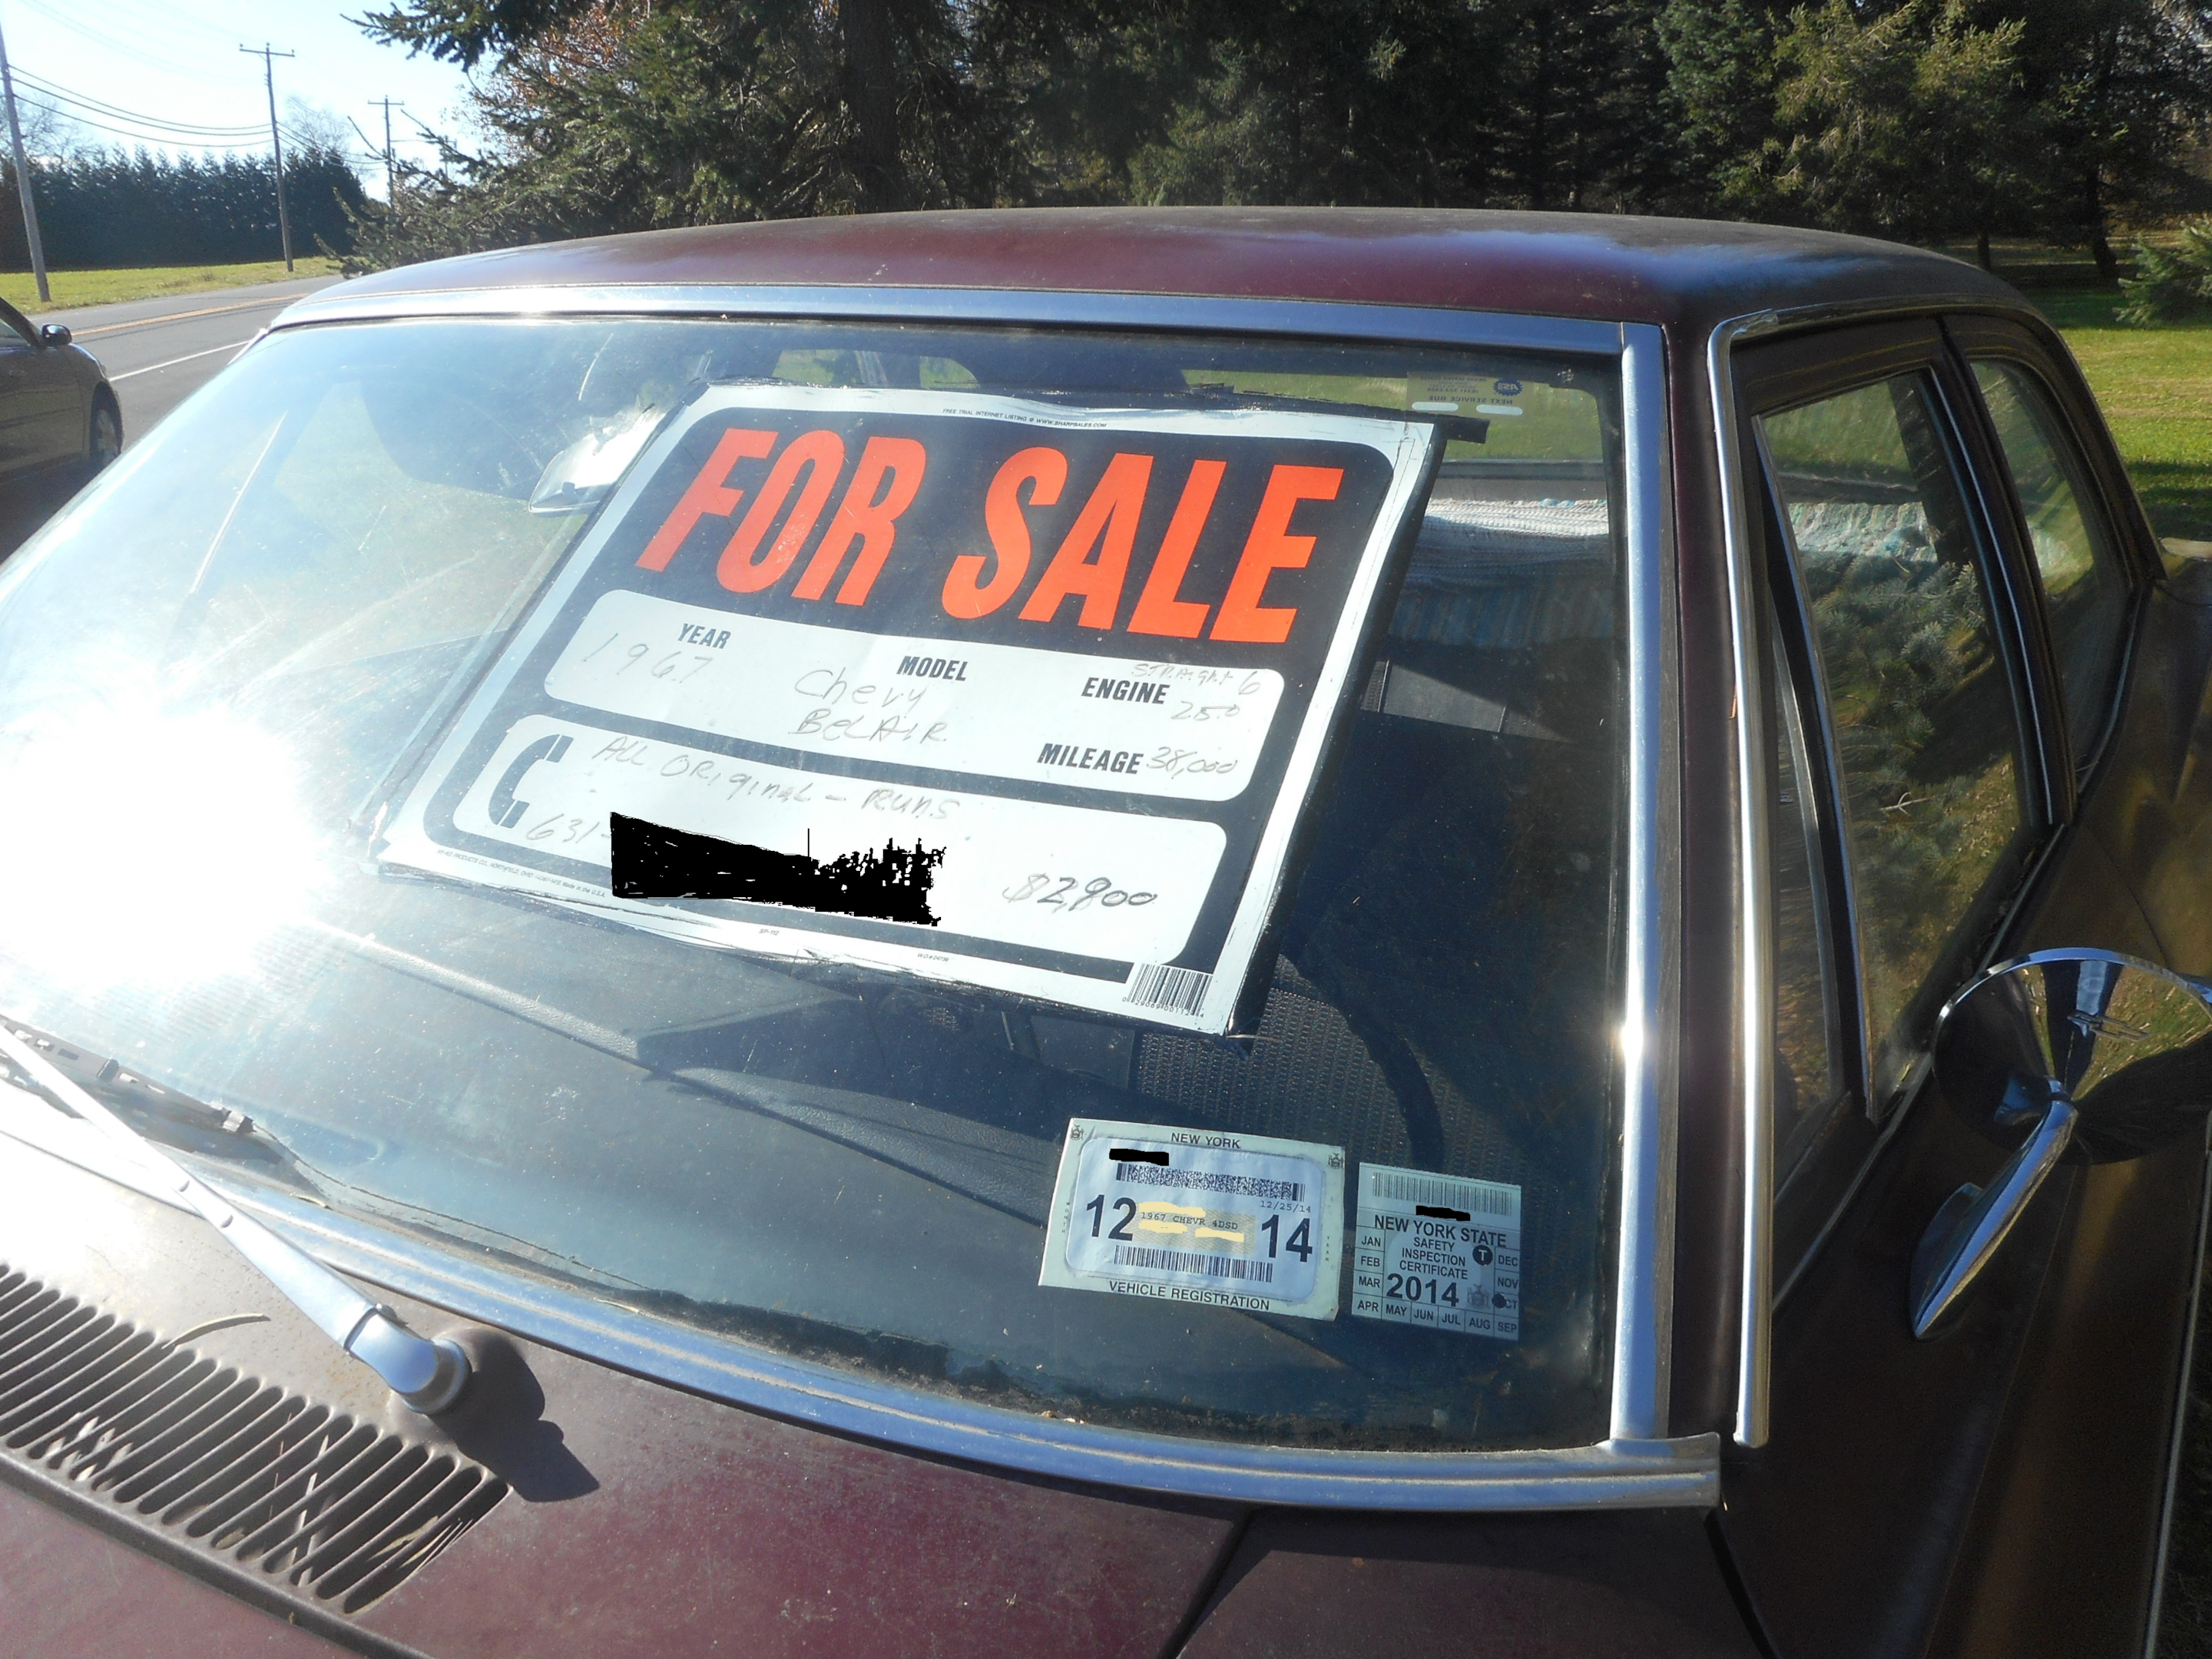 A car parked in front of a house with a "For Sale" sign in the window